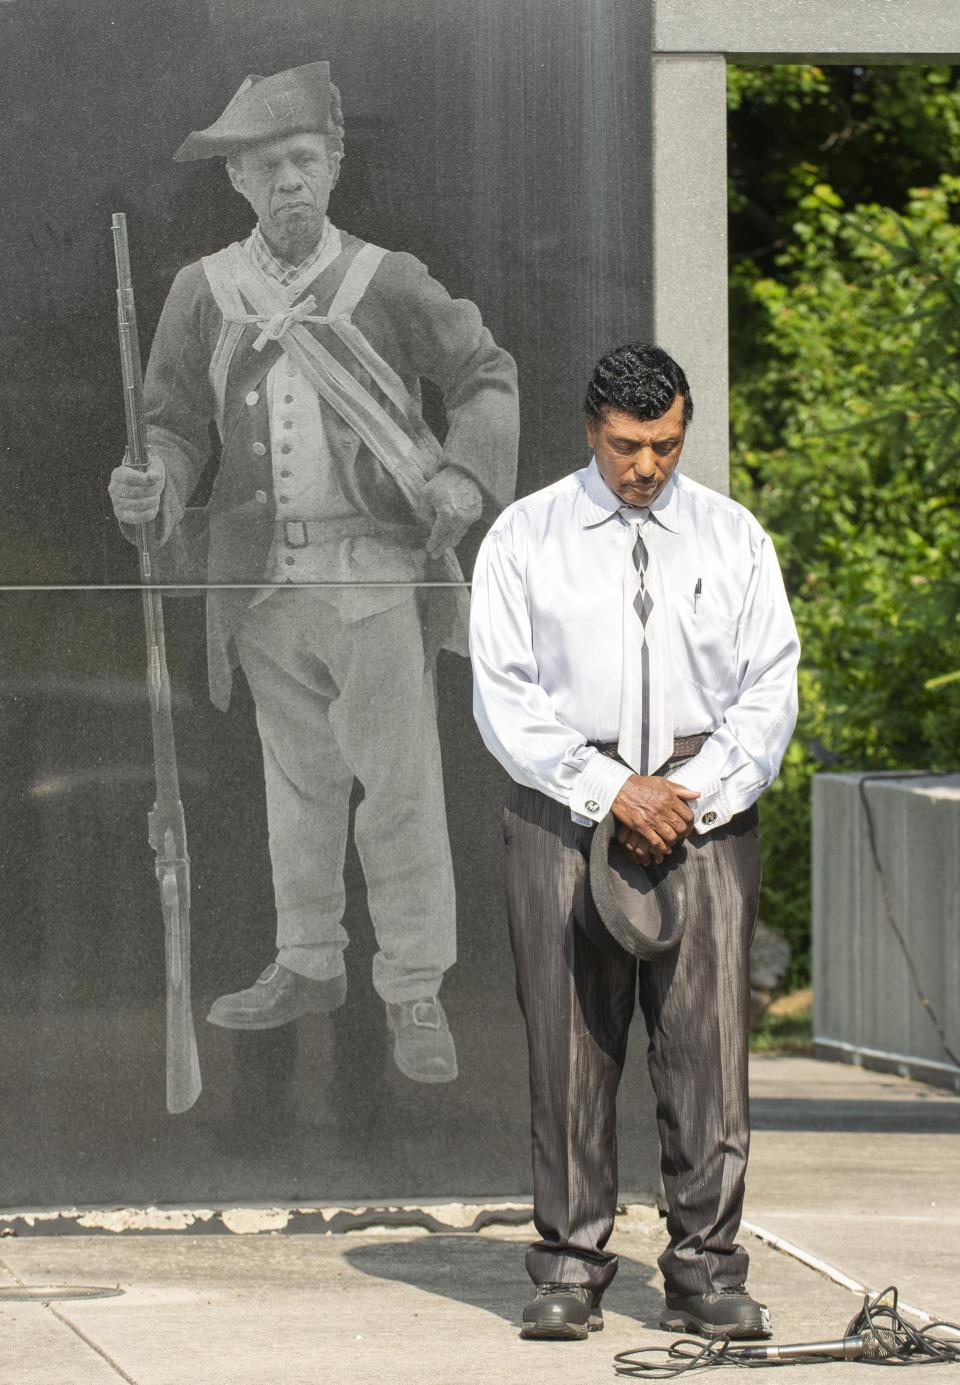 Jimmy Winters, president of the local chapter of the NAACP, stands in front of a monument dedicated to The Black Regiment at Patriots Park in Portsmouth during a previous ceremony.